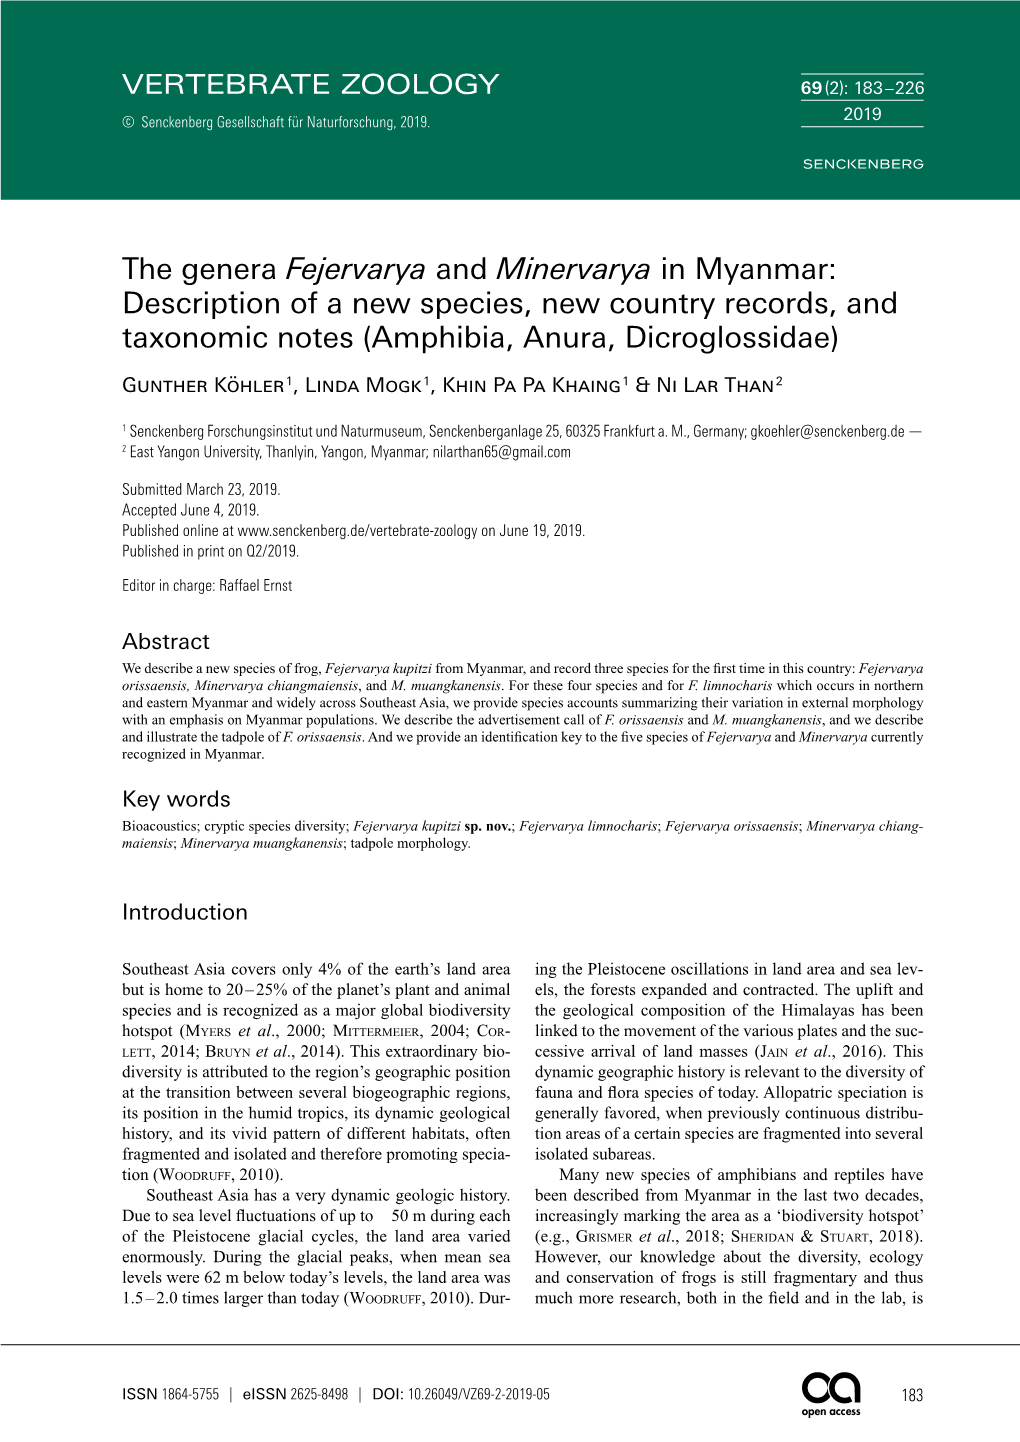 The Genera Fejervarya and Minervarya in Myanmar: Description of a New Species, New Country Records, and Taxonomic Notes (Amphibia, Anura, Dicroglossidae)